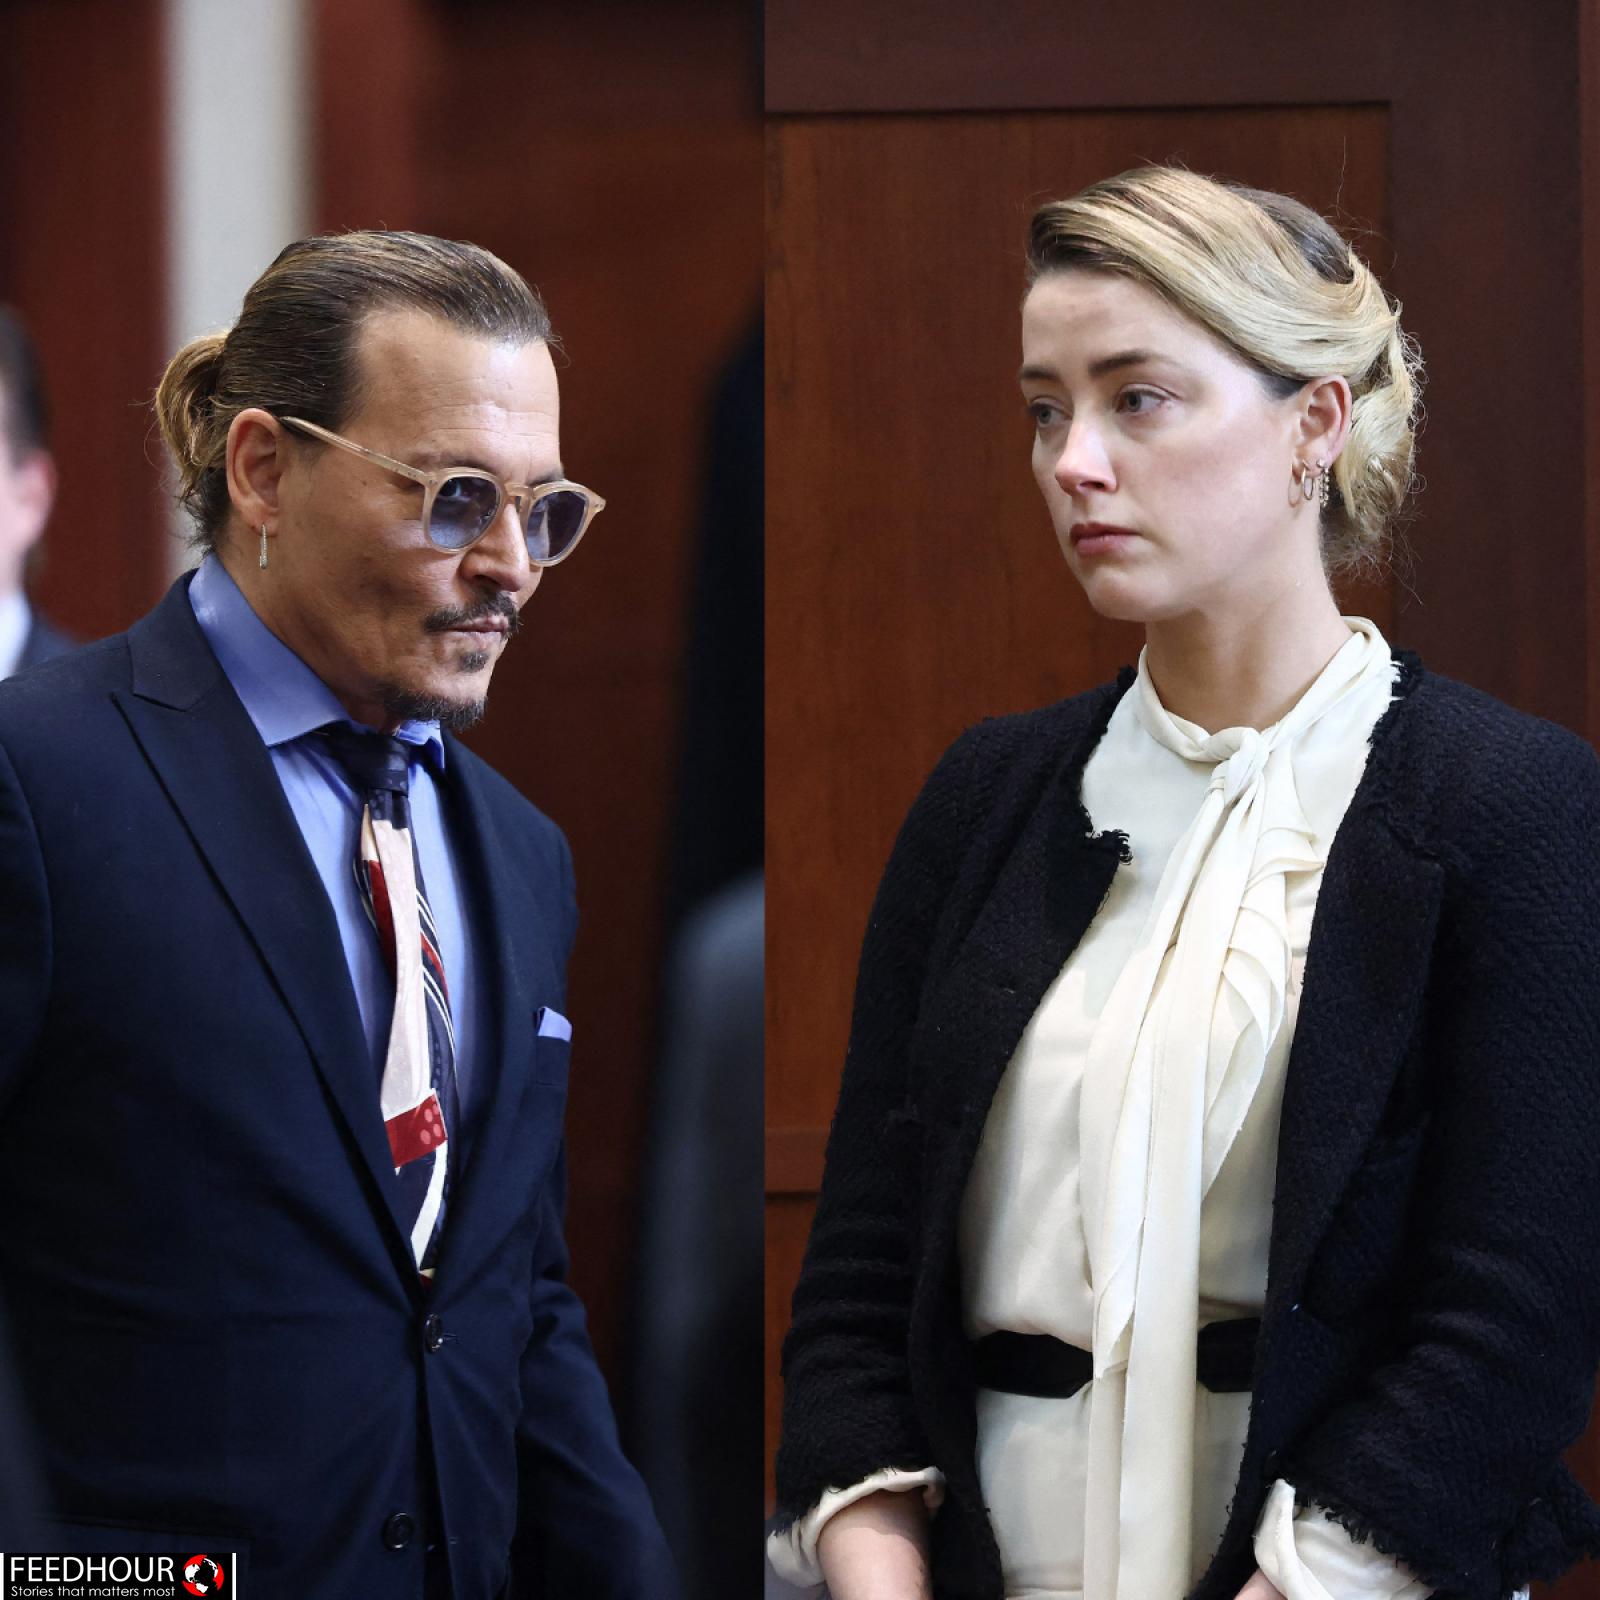 Johnny Depp wins defamation lawsuit against ex-wife Amber Heard. Heard have to pay $15 million in damages.